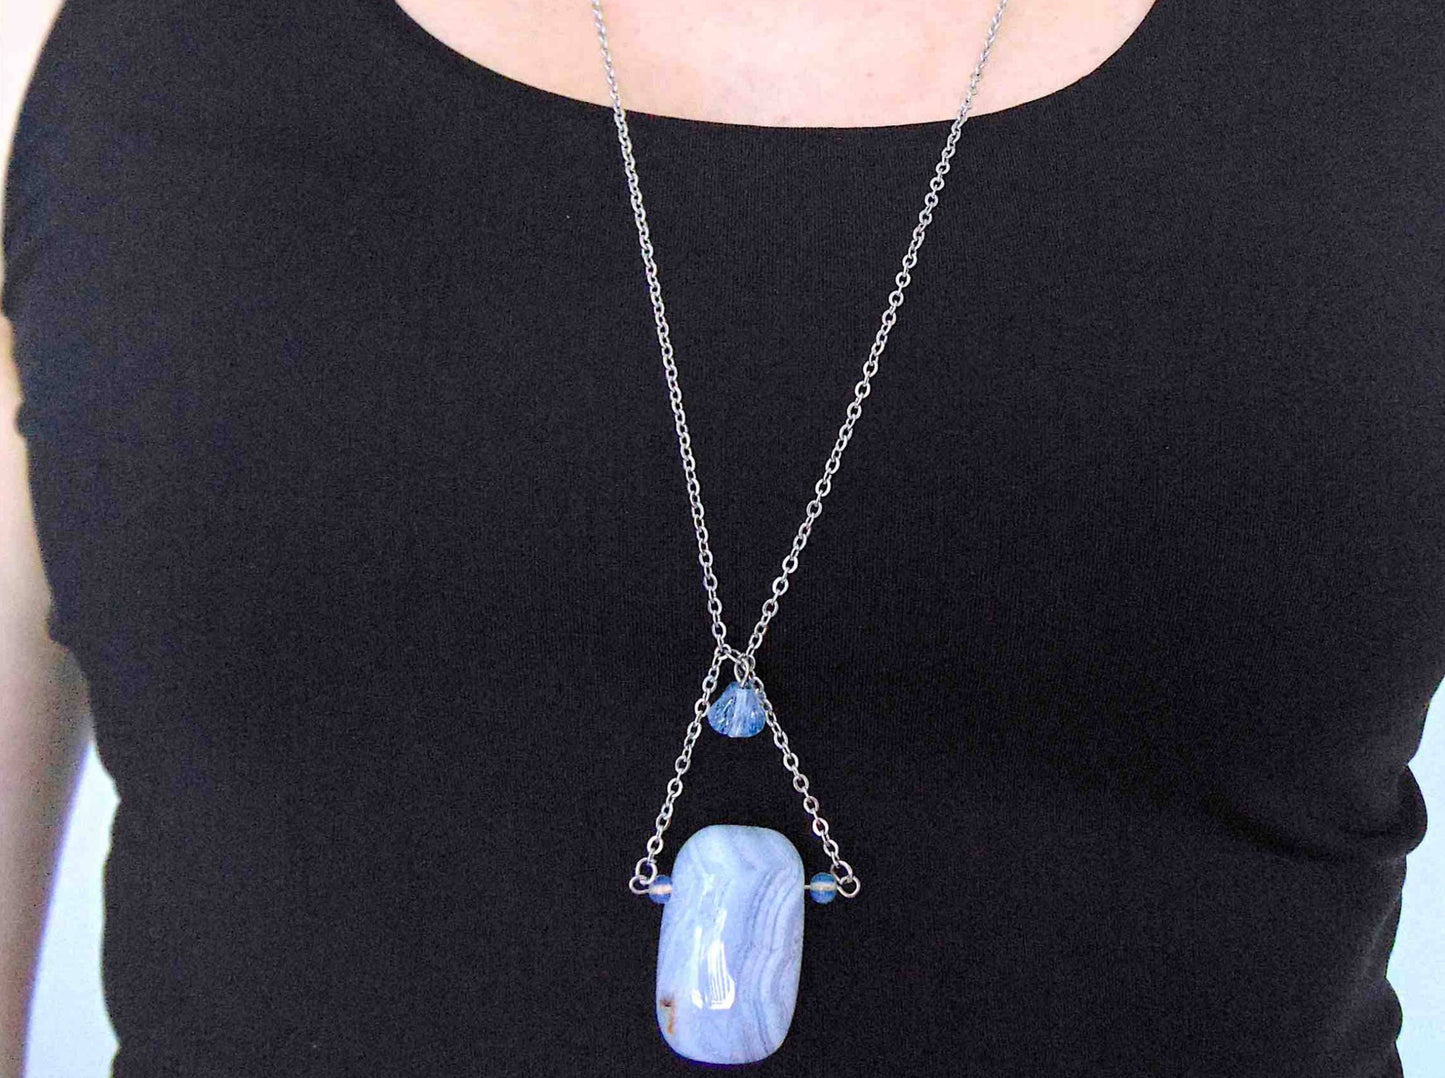 31-inch necklace with large rectangular blue lace agate stone pendant in triangular layout, matching glass beads, stainless steel chain